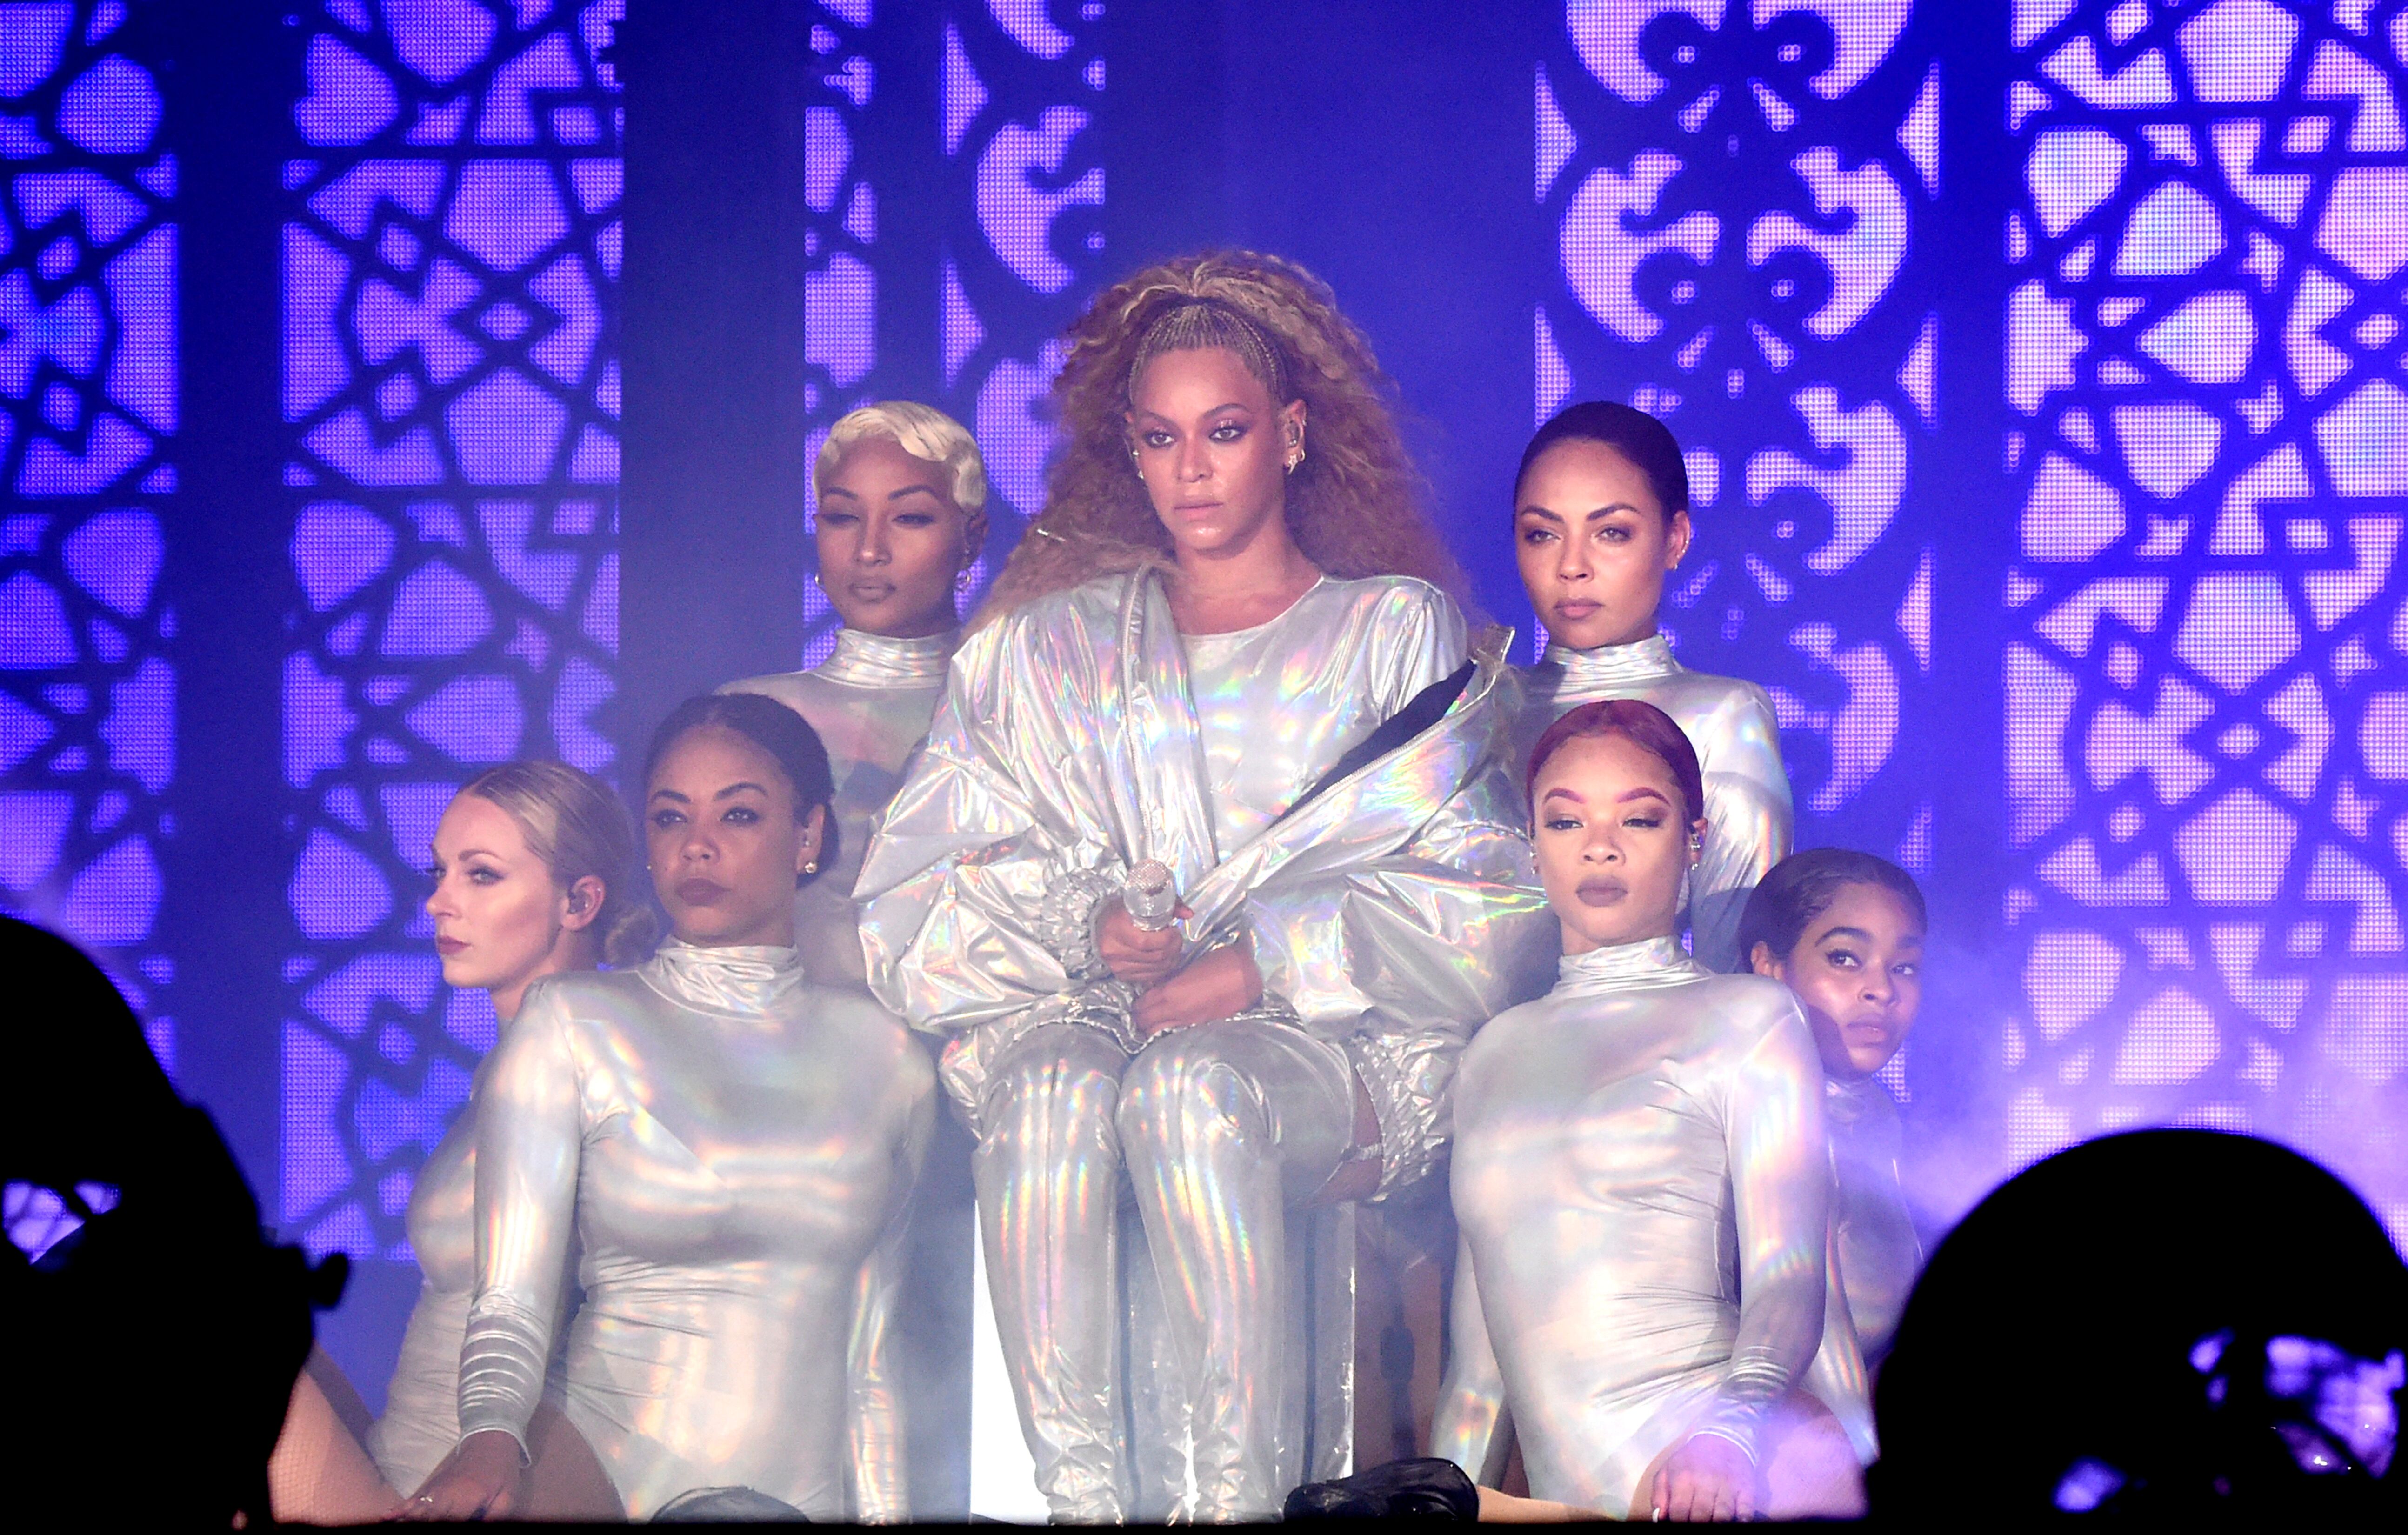 Beyonce at one of her performances | Source: Getty Images/GlobalImagesUkraine